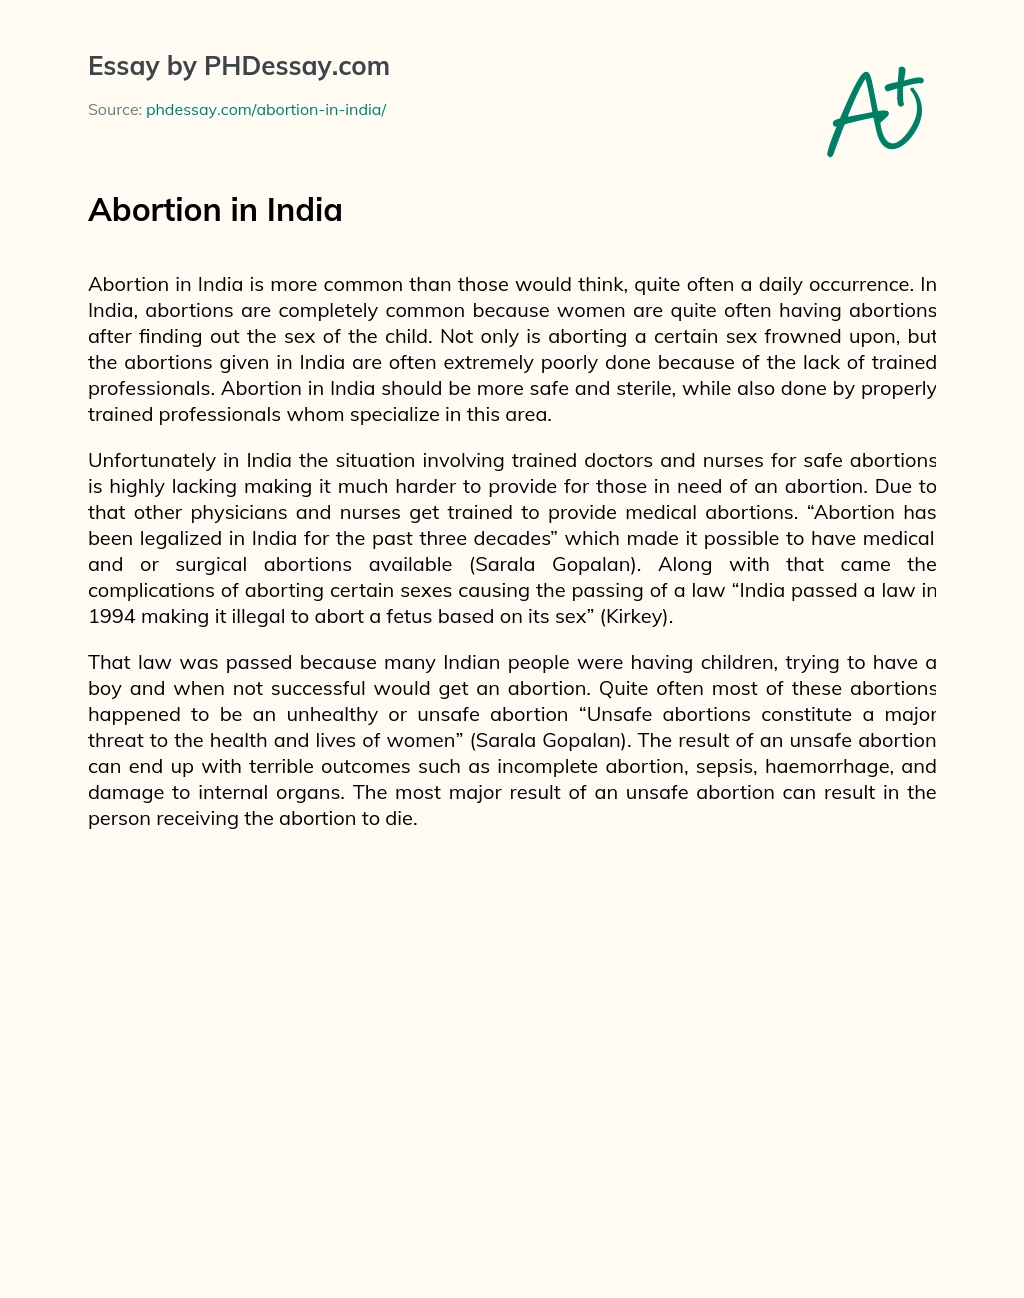 Abortion in India essay